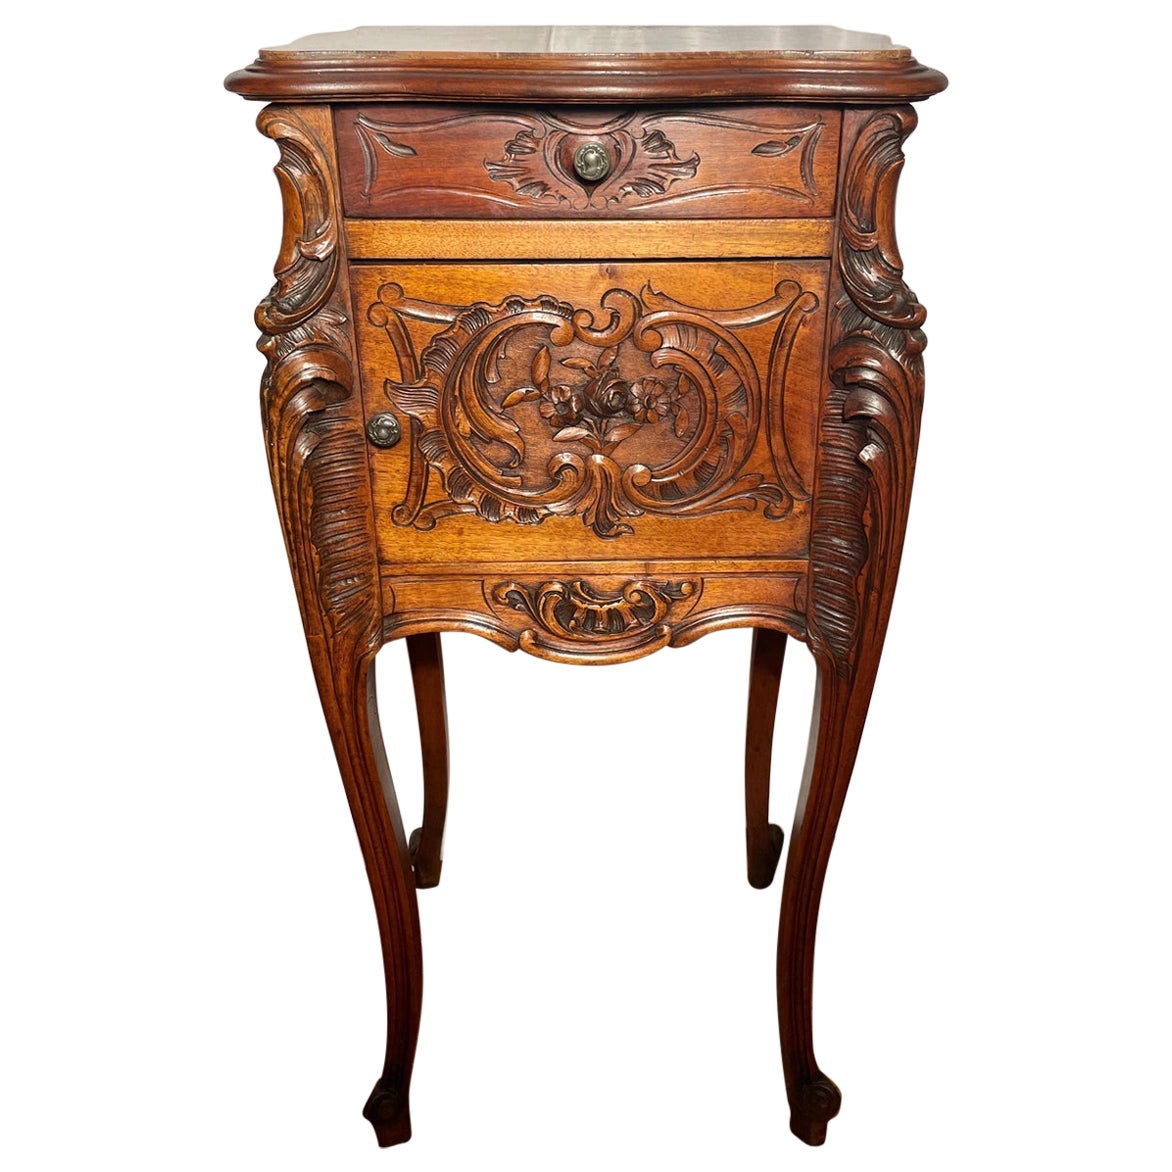 Antique French Walnut and Marble Top Night Table, Circa 1880.